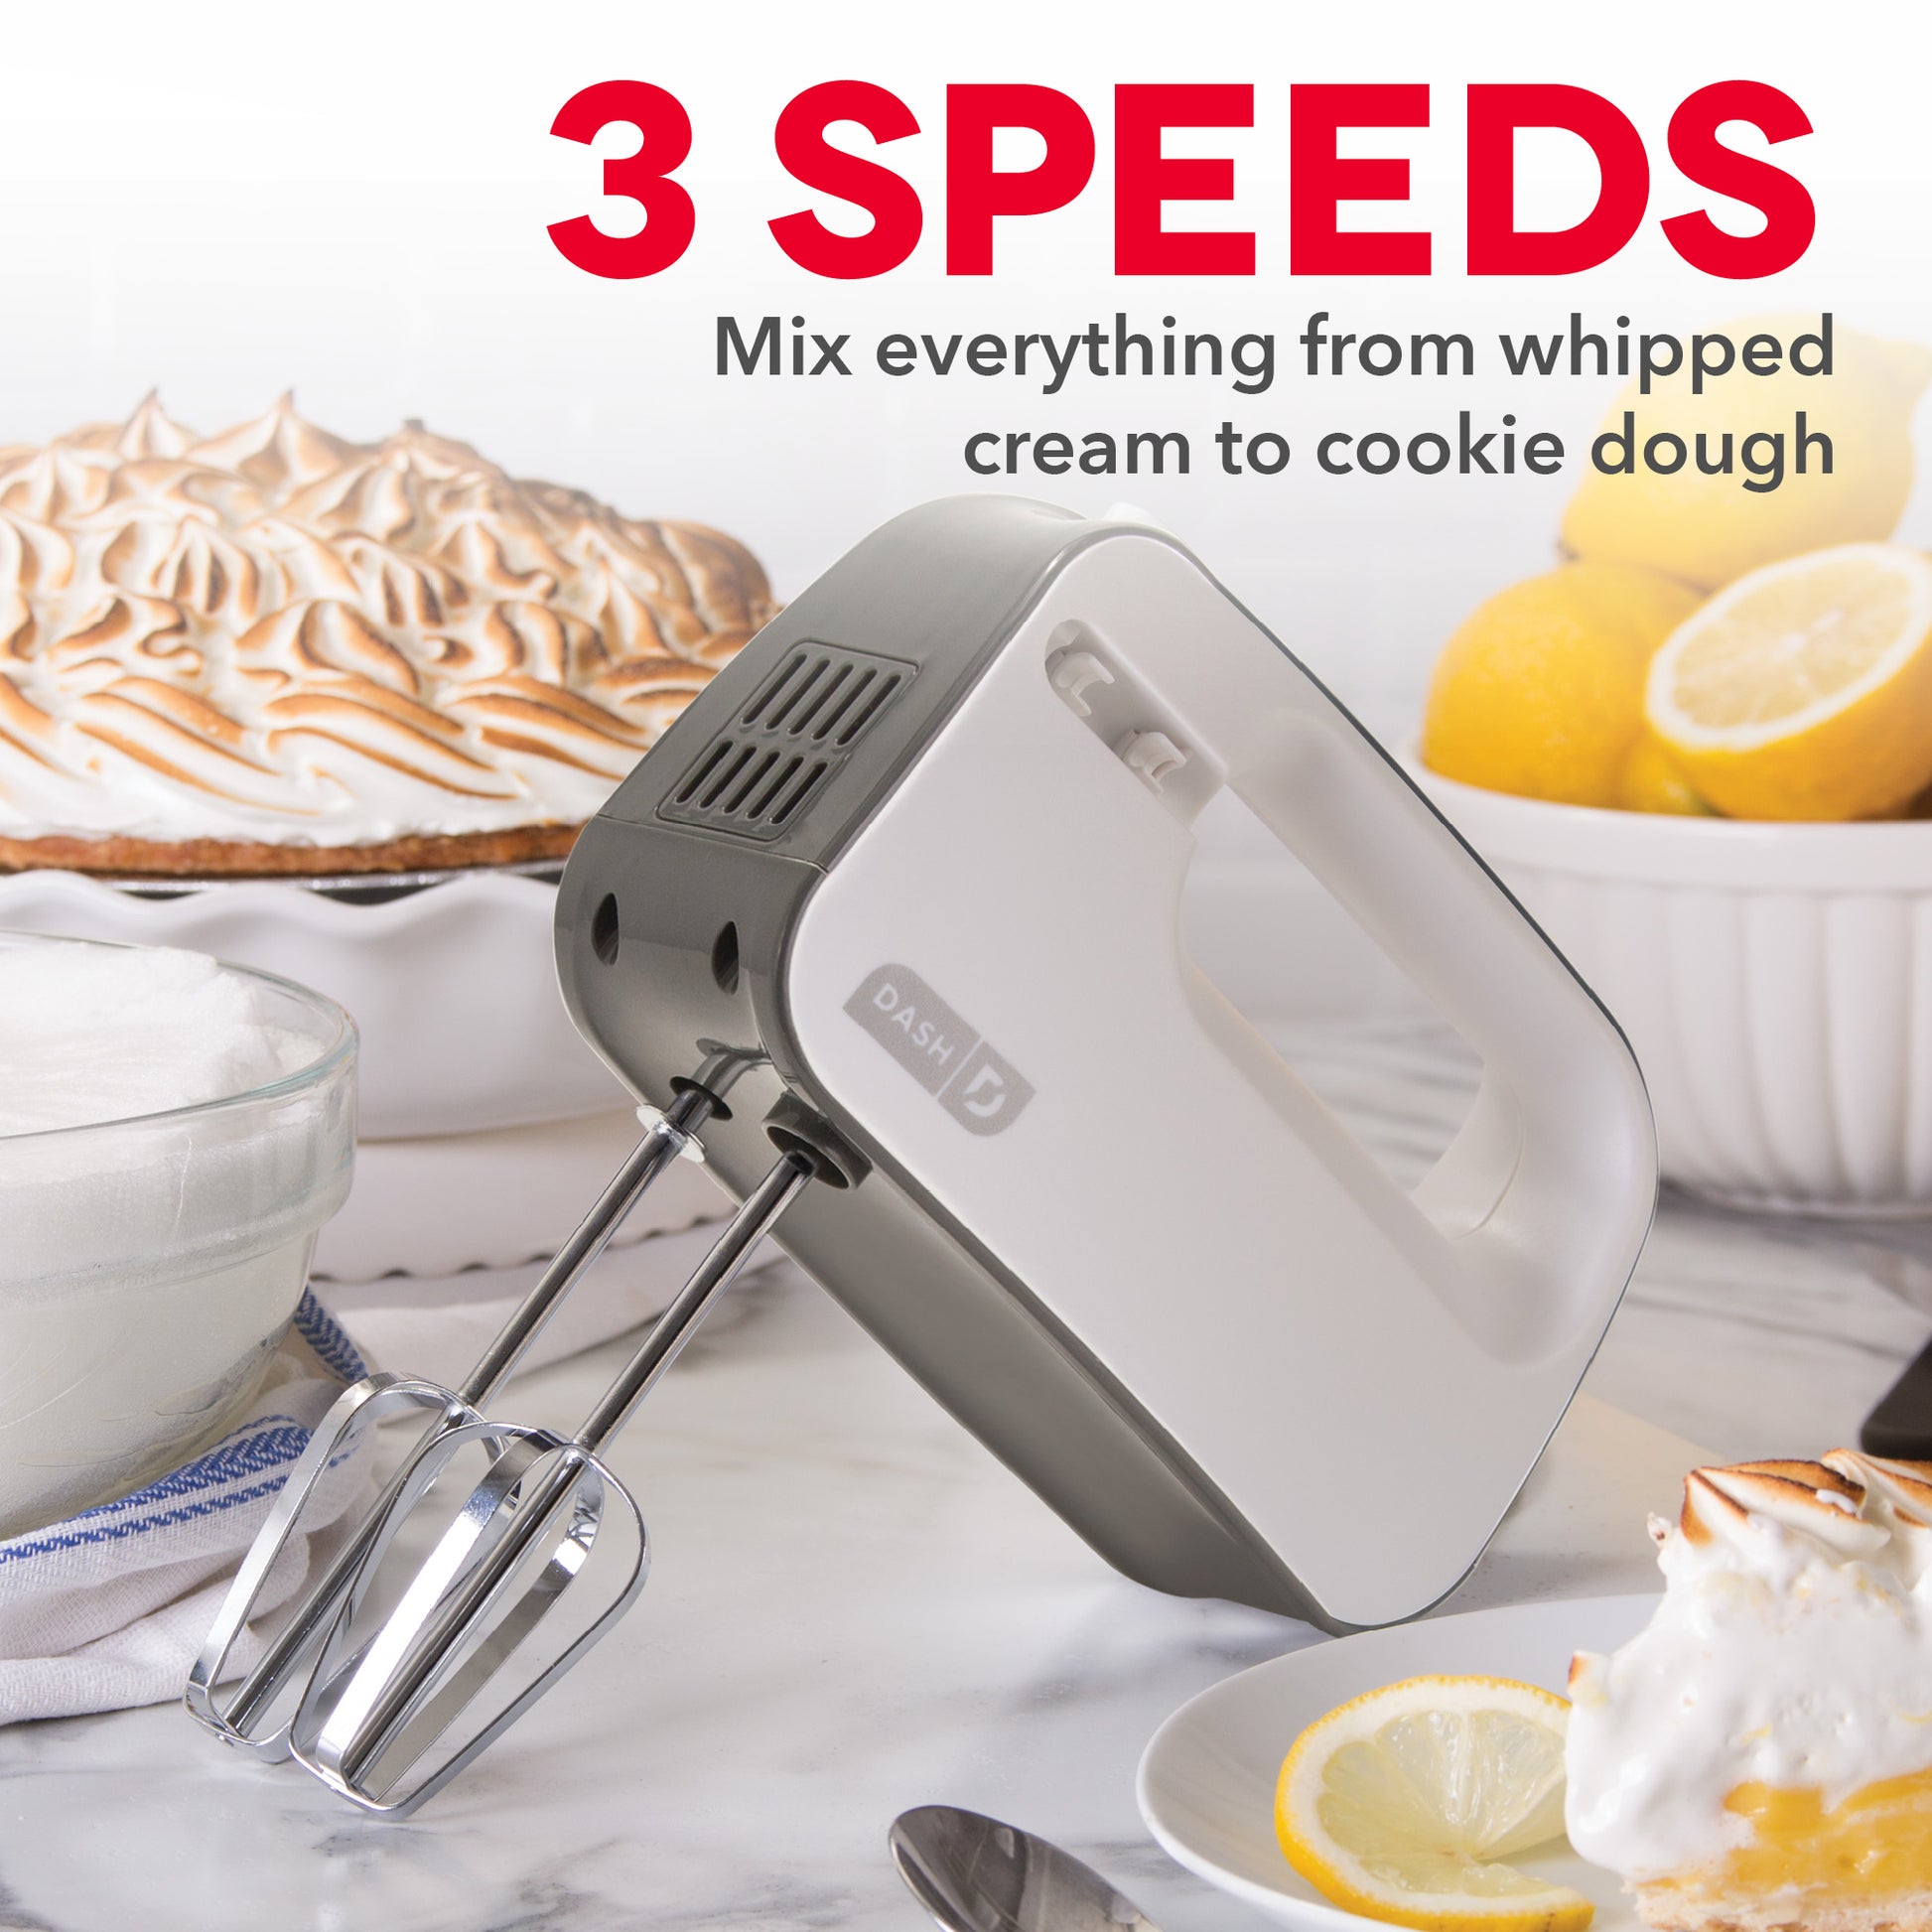 Dash SmartStore™ Compact Hand Mixer Electric for Whipping + Mixing Cookies,  Brownies, Cakes, Dough, Batters, Meringues & More, 3 Speed - Grey